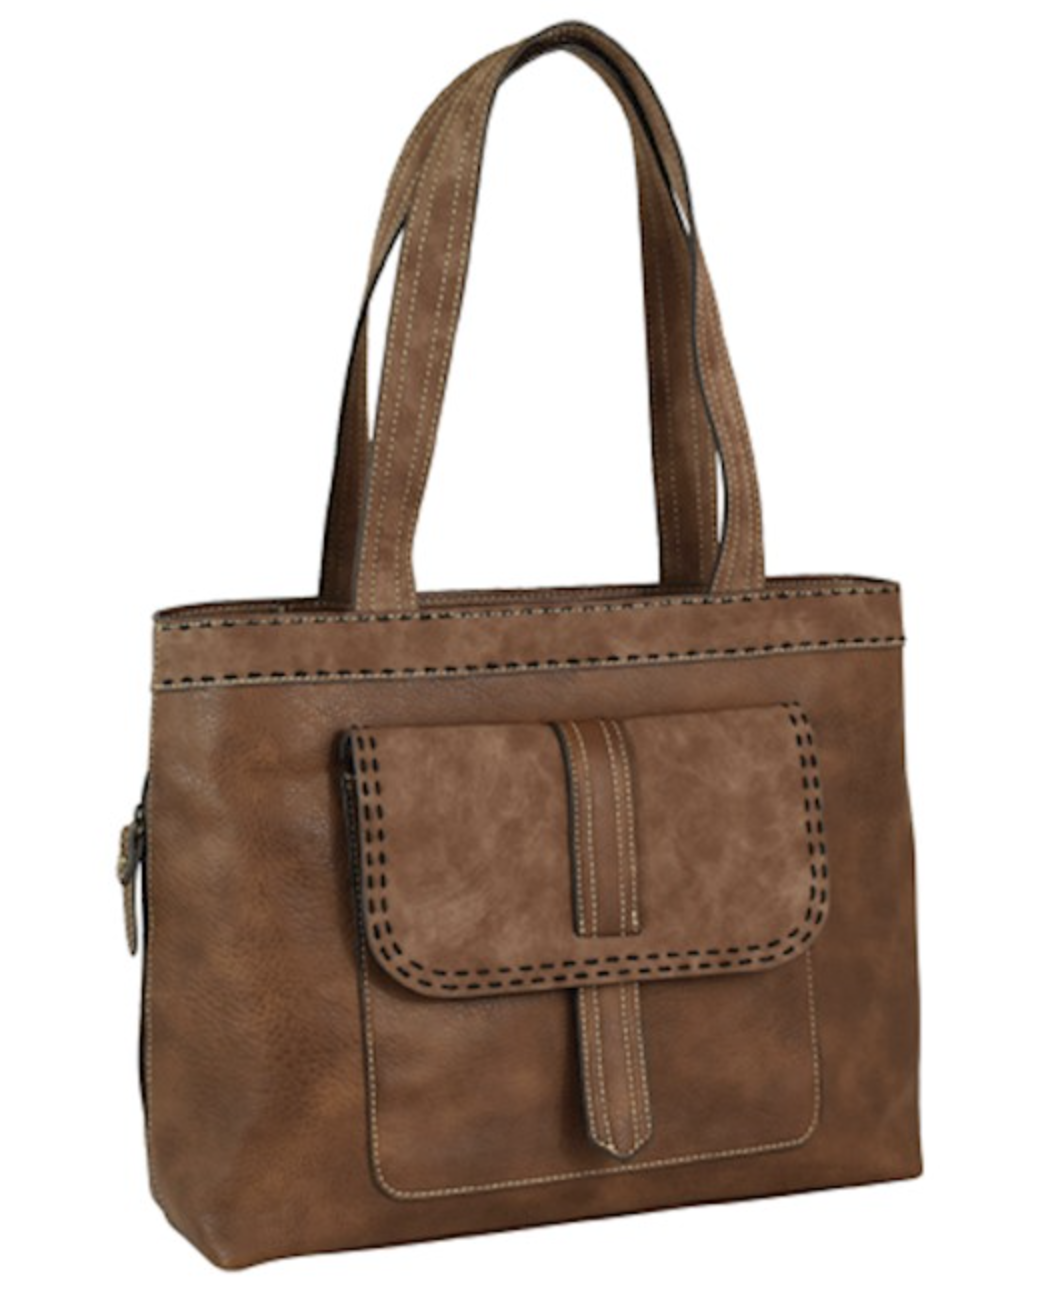 Tony Lama Tony Lama Conceal Carry Tote Brown w/ Double Stitch